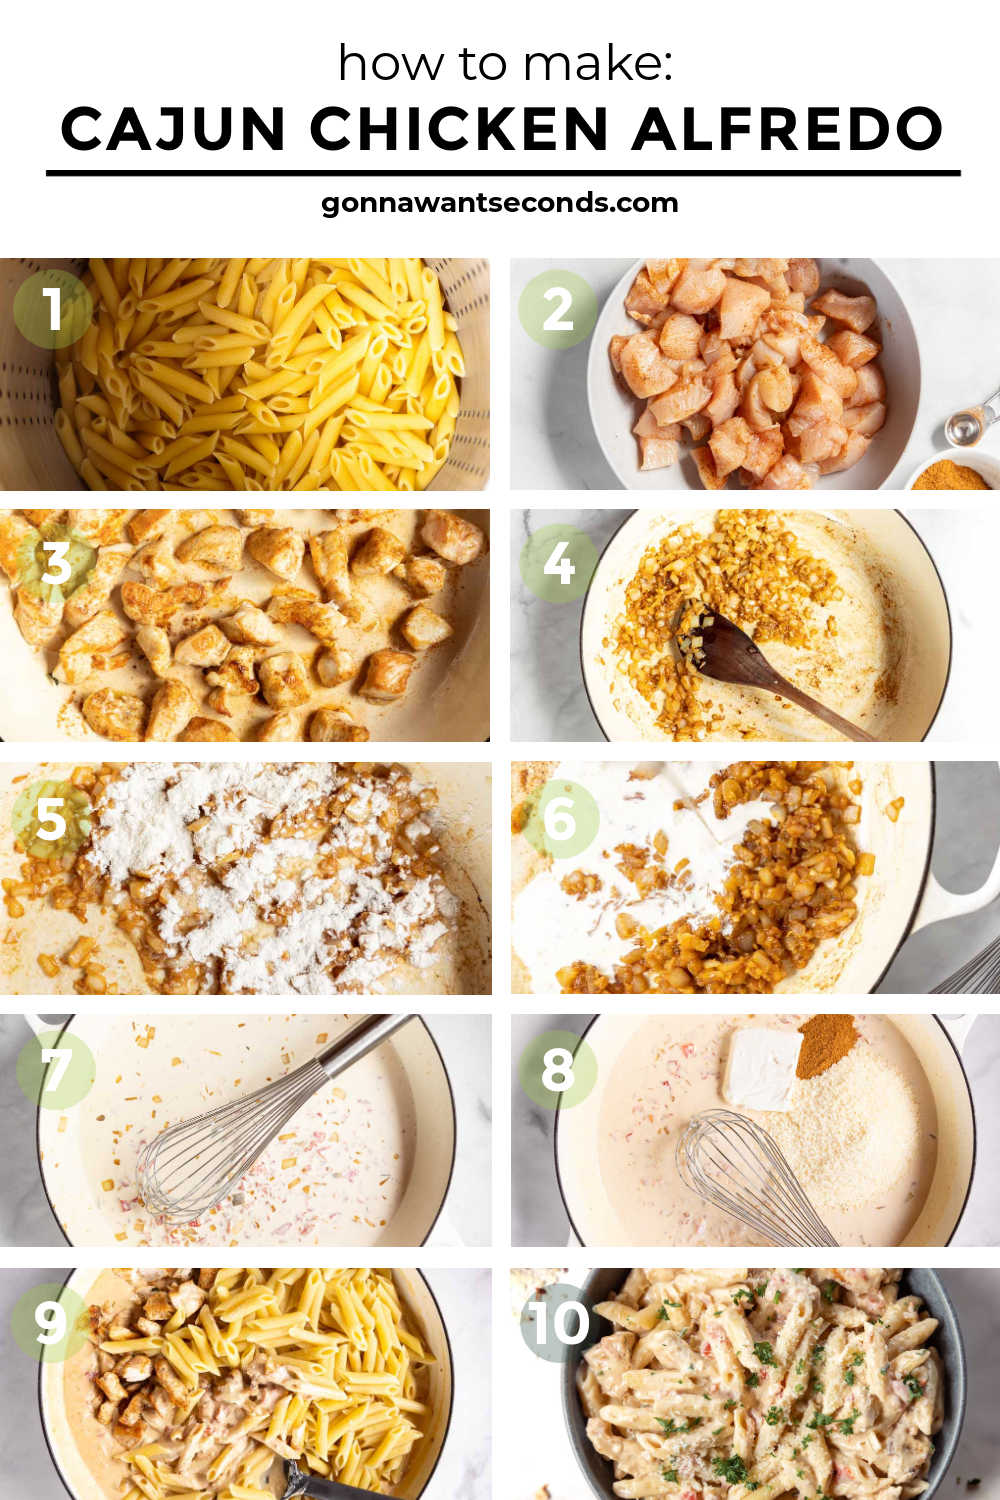 Step by step How to make Cajun Chicken Alfredo